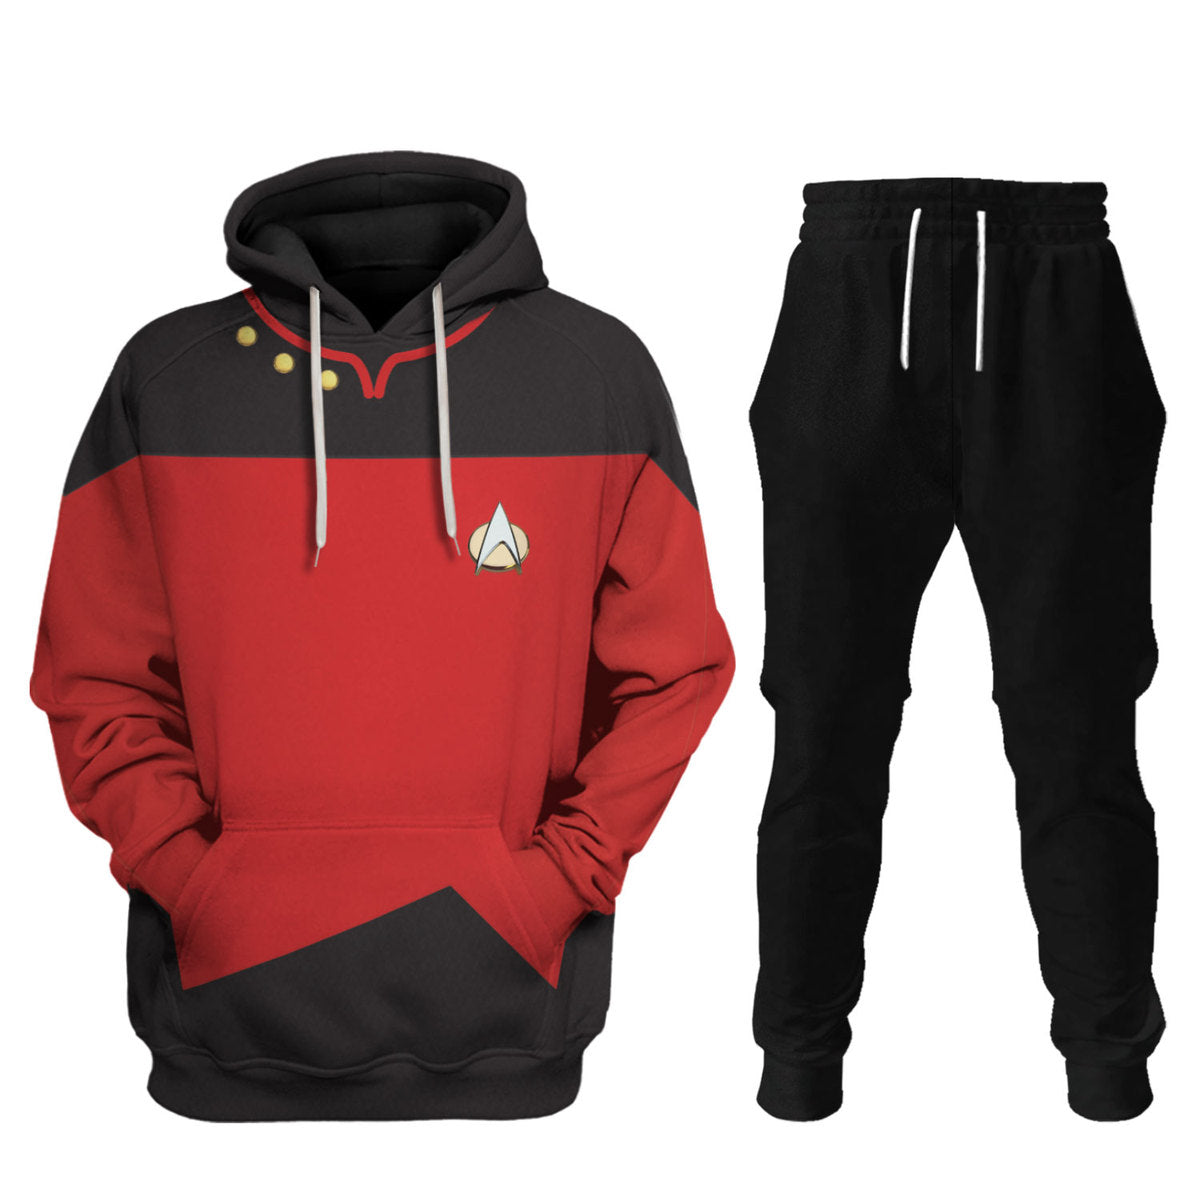 The Next Generation Red track suit 